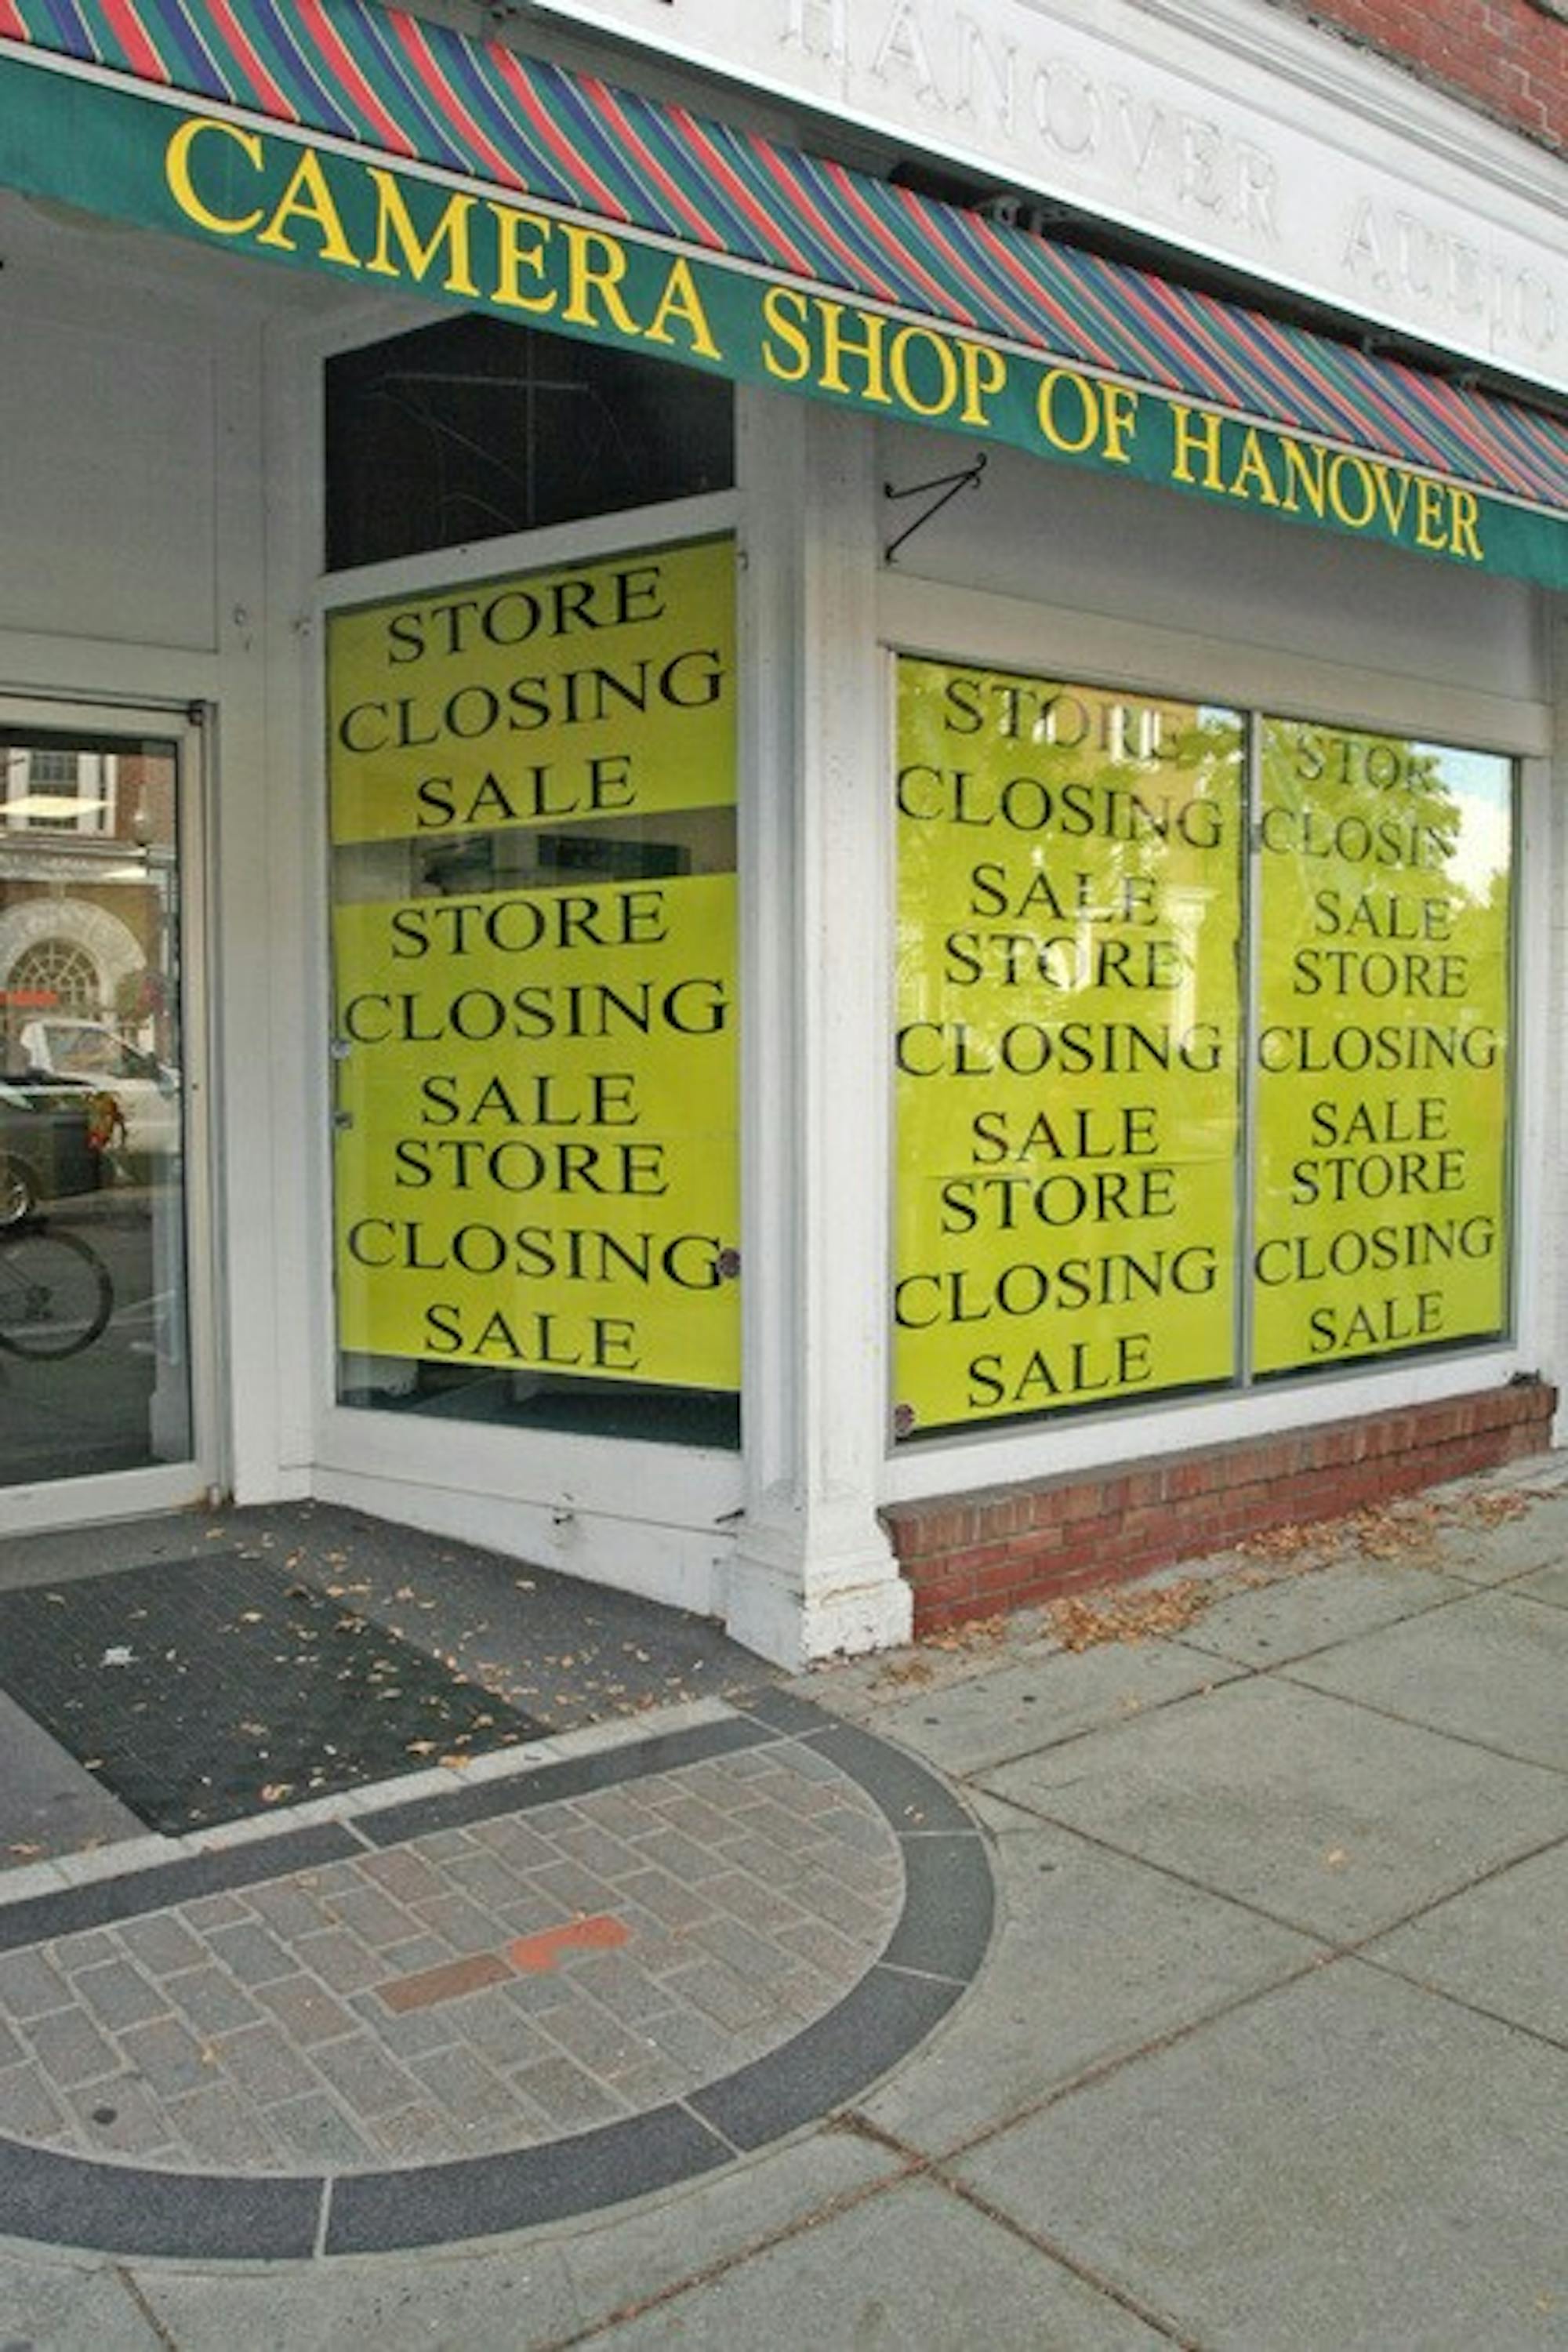 Hanover Camera Shop's owner Dena Romero said competition is not toblame for her store's closure. 